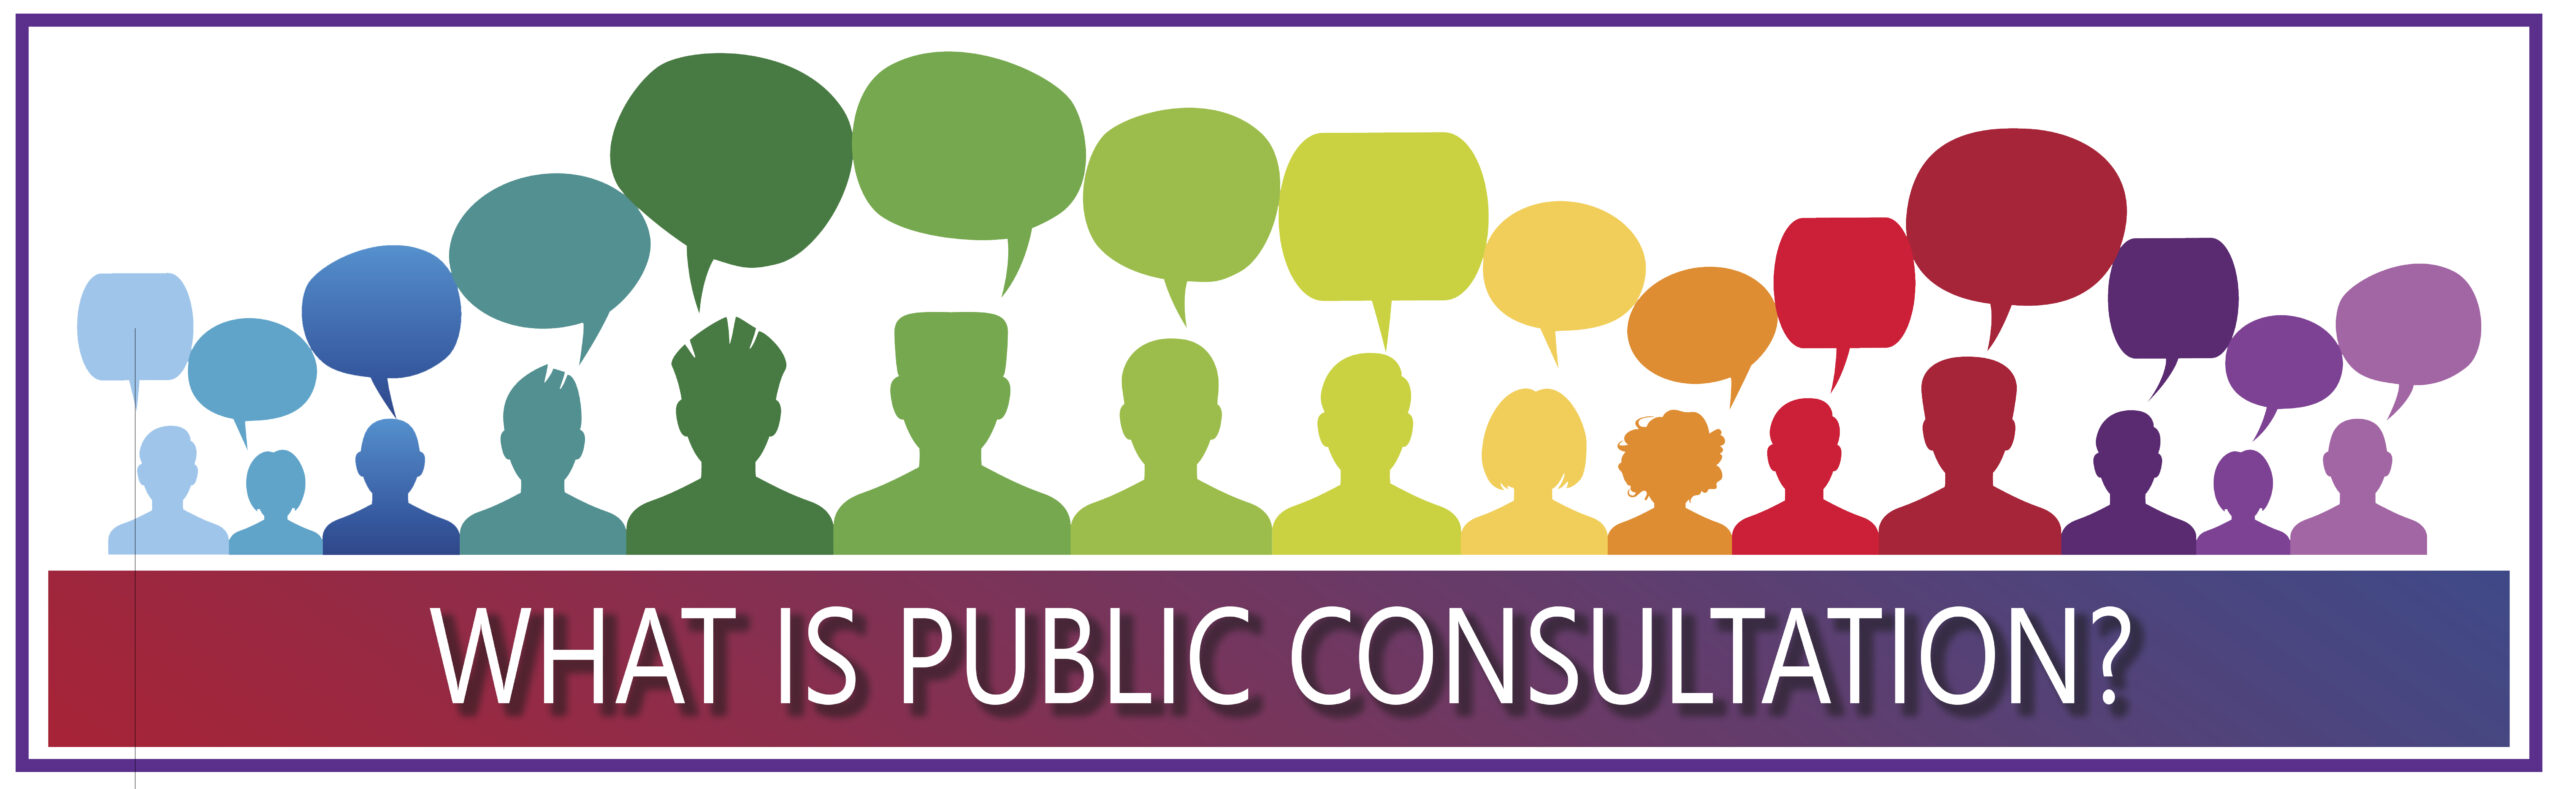 https://publicconsultation.org/wp-content/uploads/2022/08/what_is_public_consultation-scaled.jpg